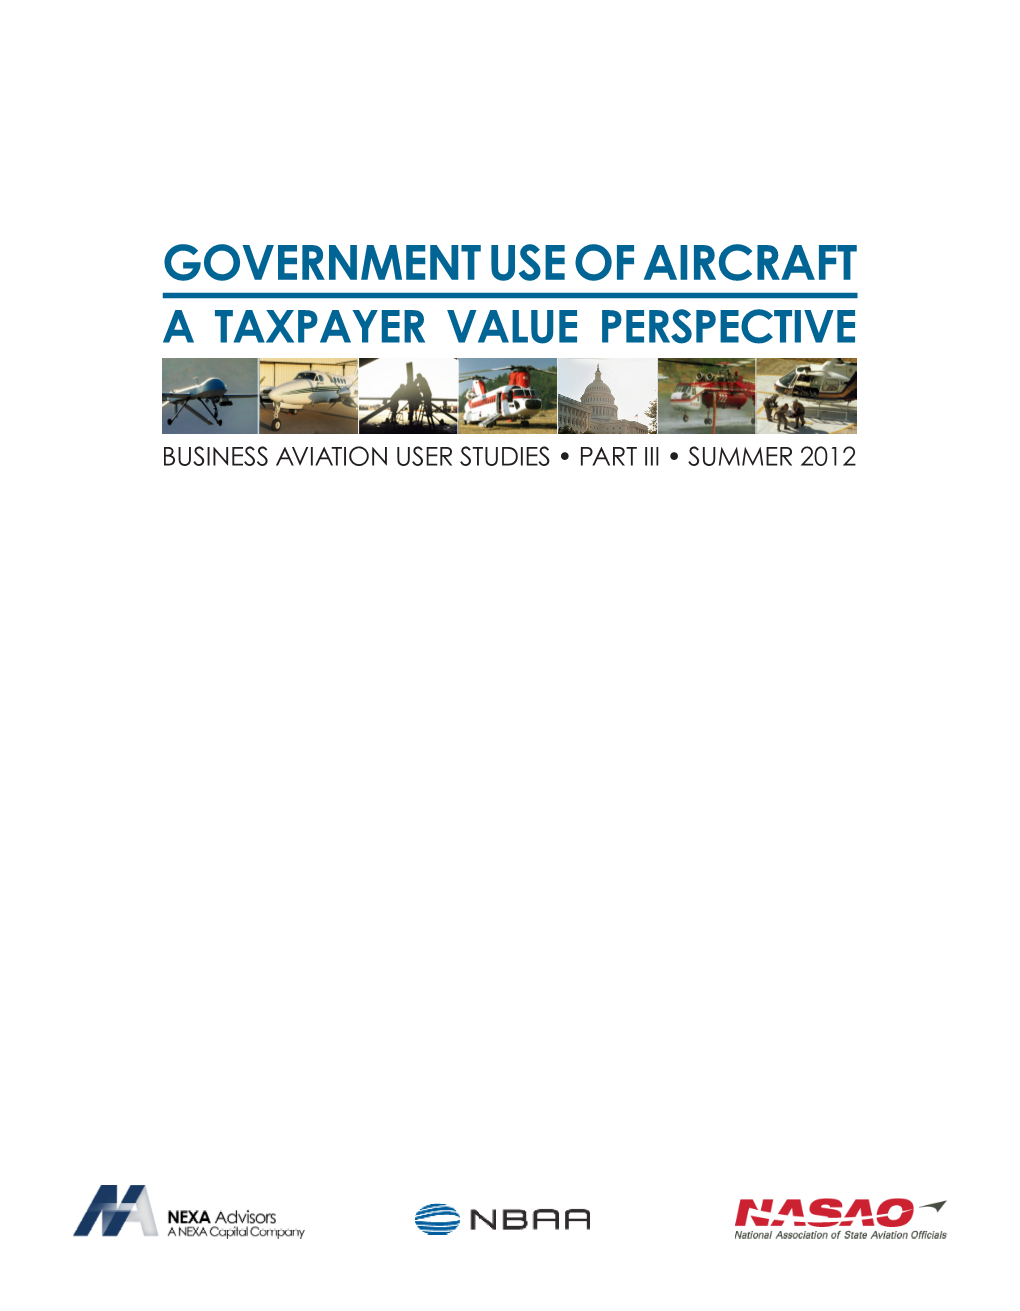 Government Use of Aircraft a Taxpayer Value Perspective